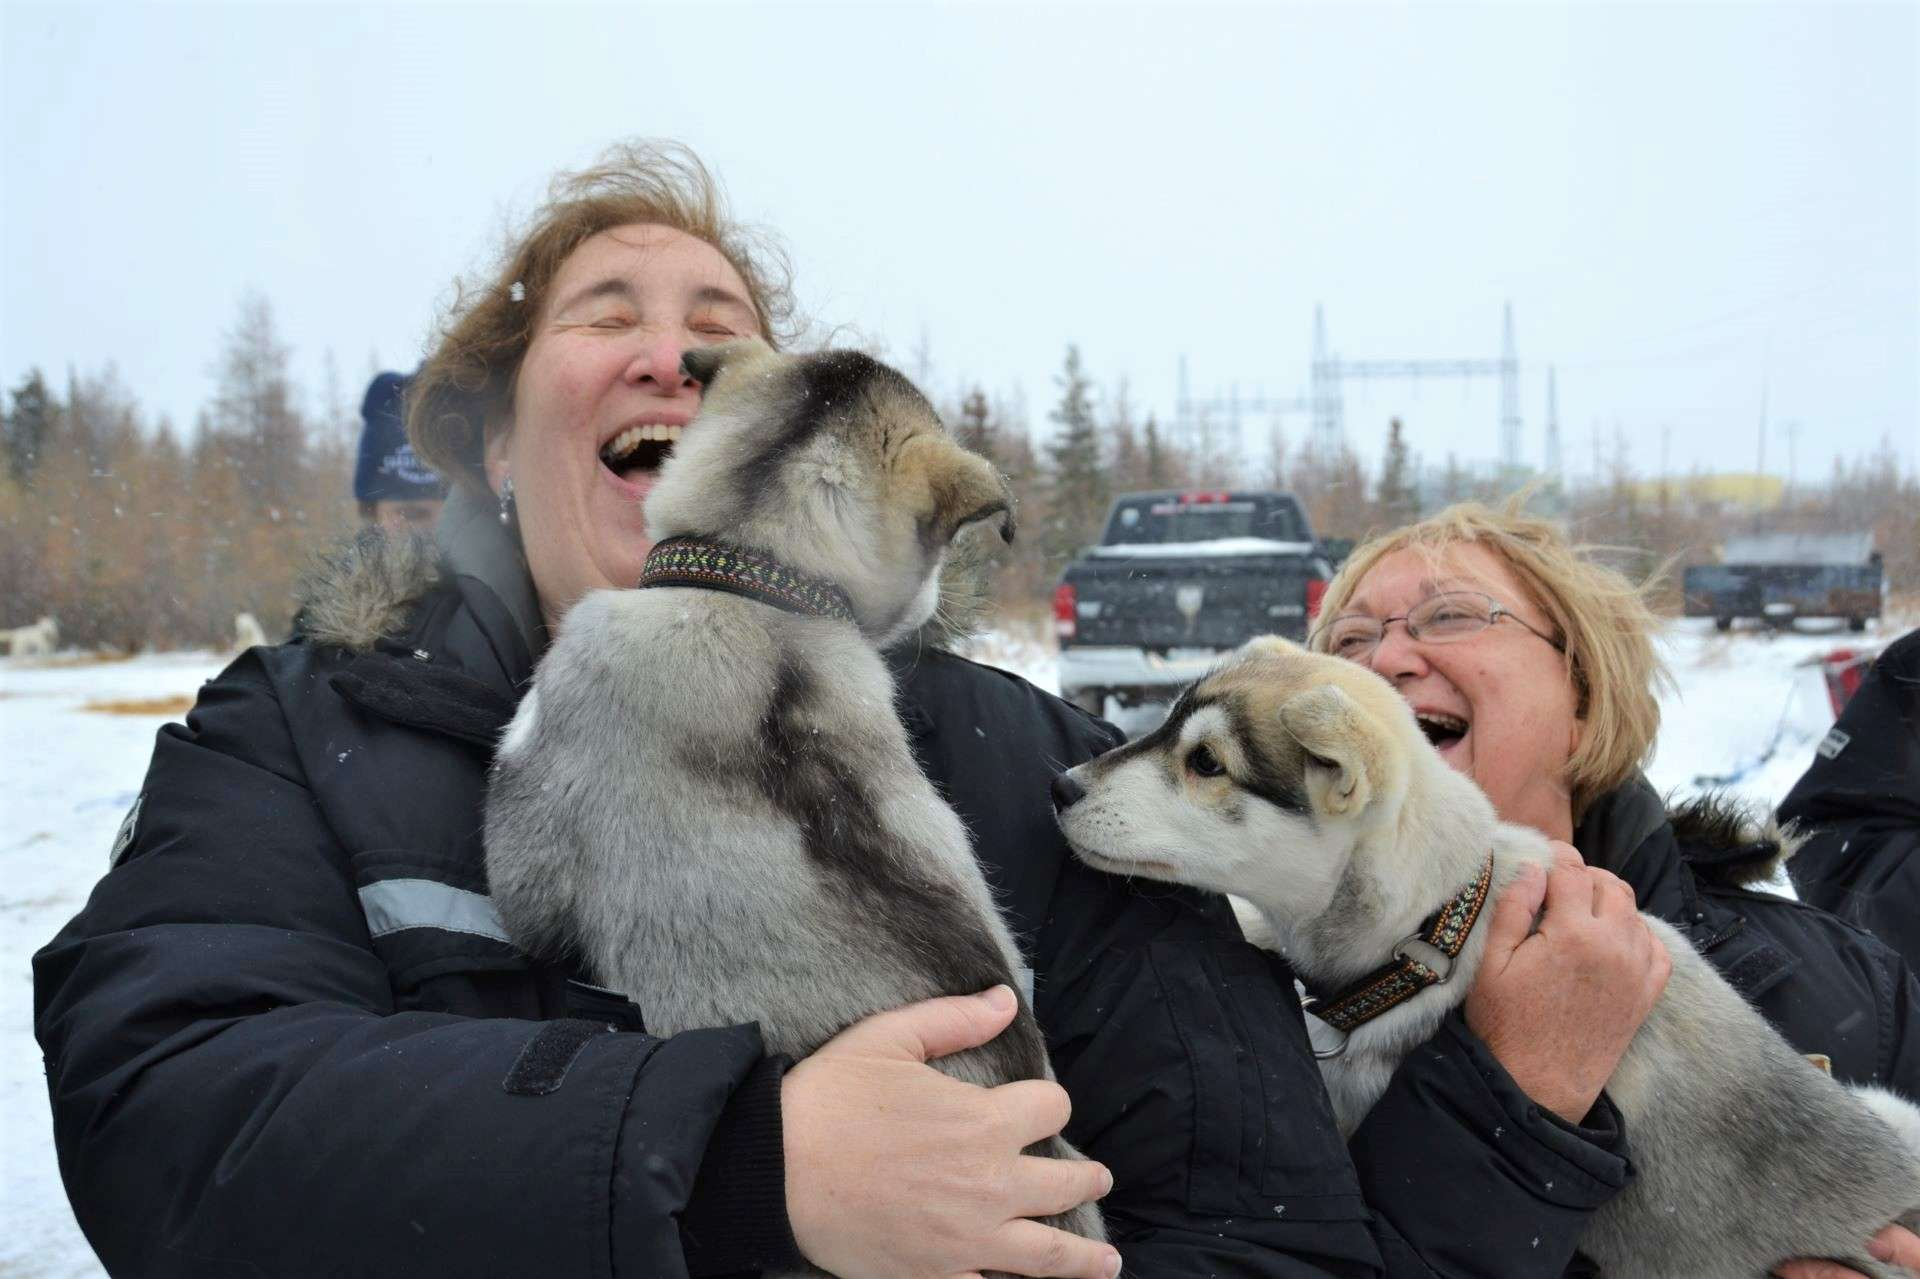 Sled dog puppies in Canada